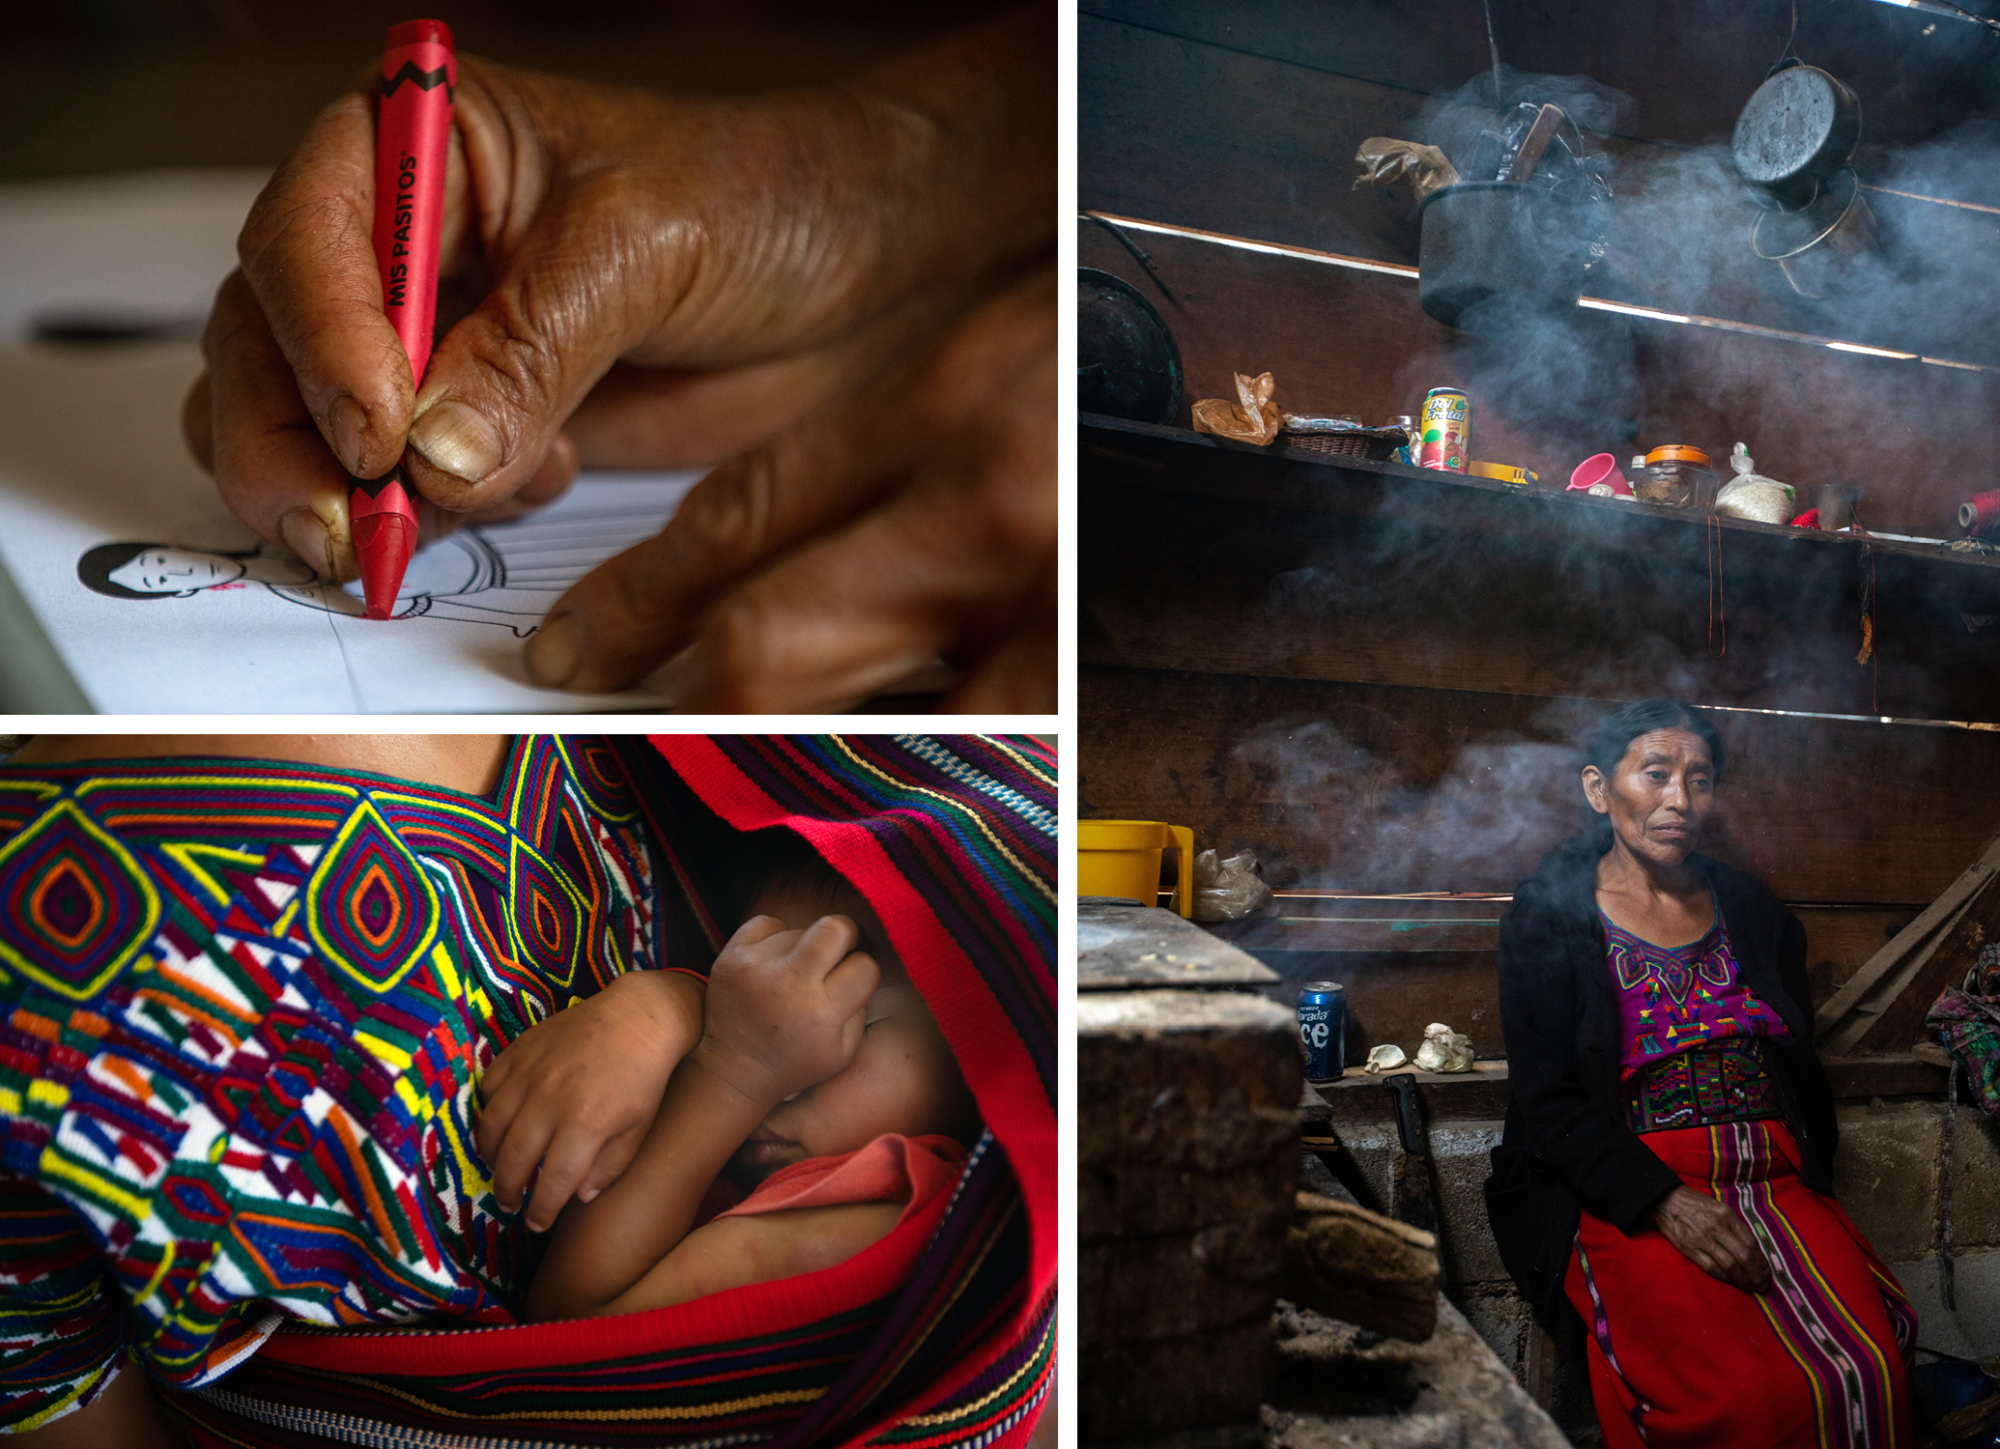 Clockwise from top left, a hand holds a crayon; a woman in a red dress sits amid smoke; a child nestled amid colorful cloth 